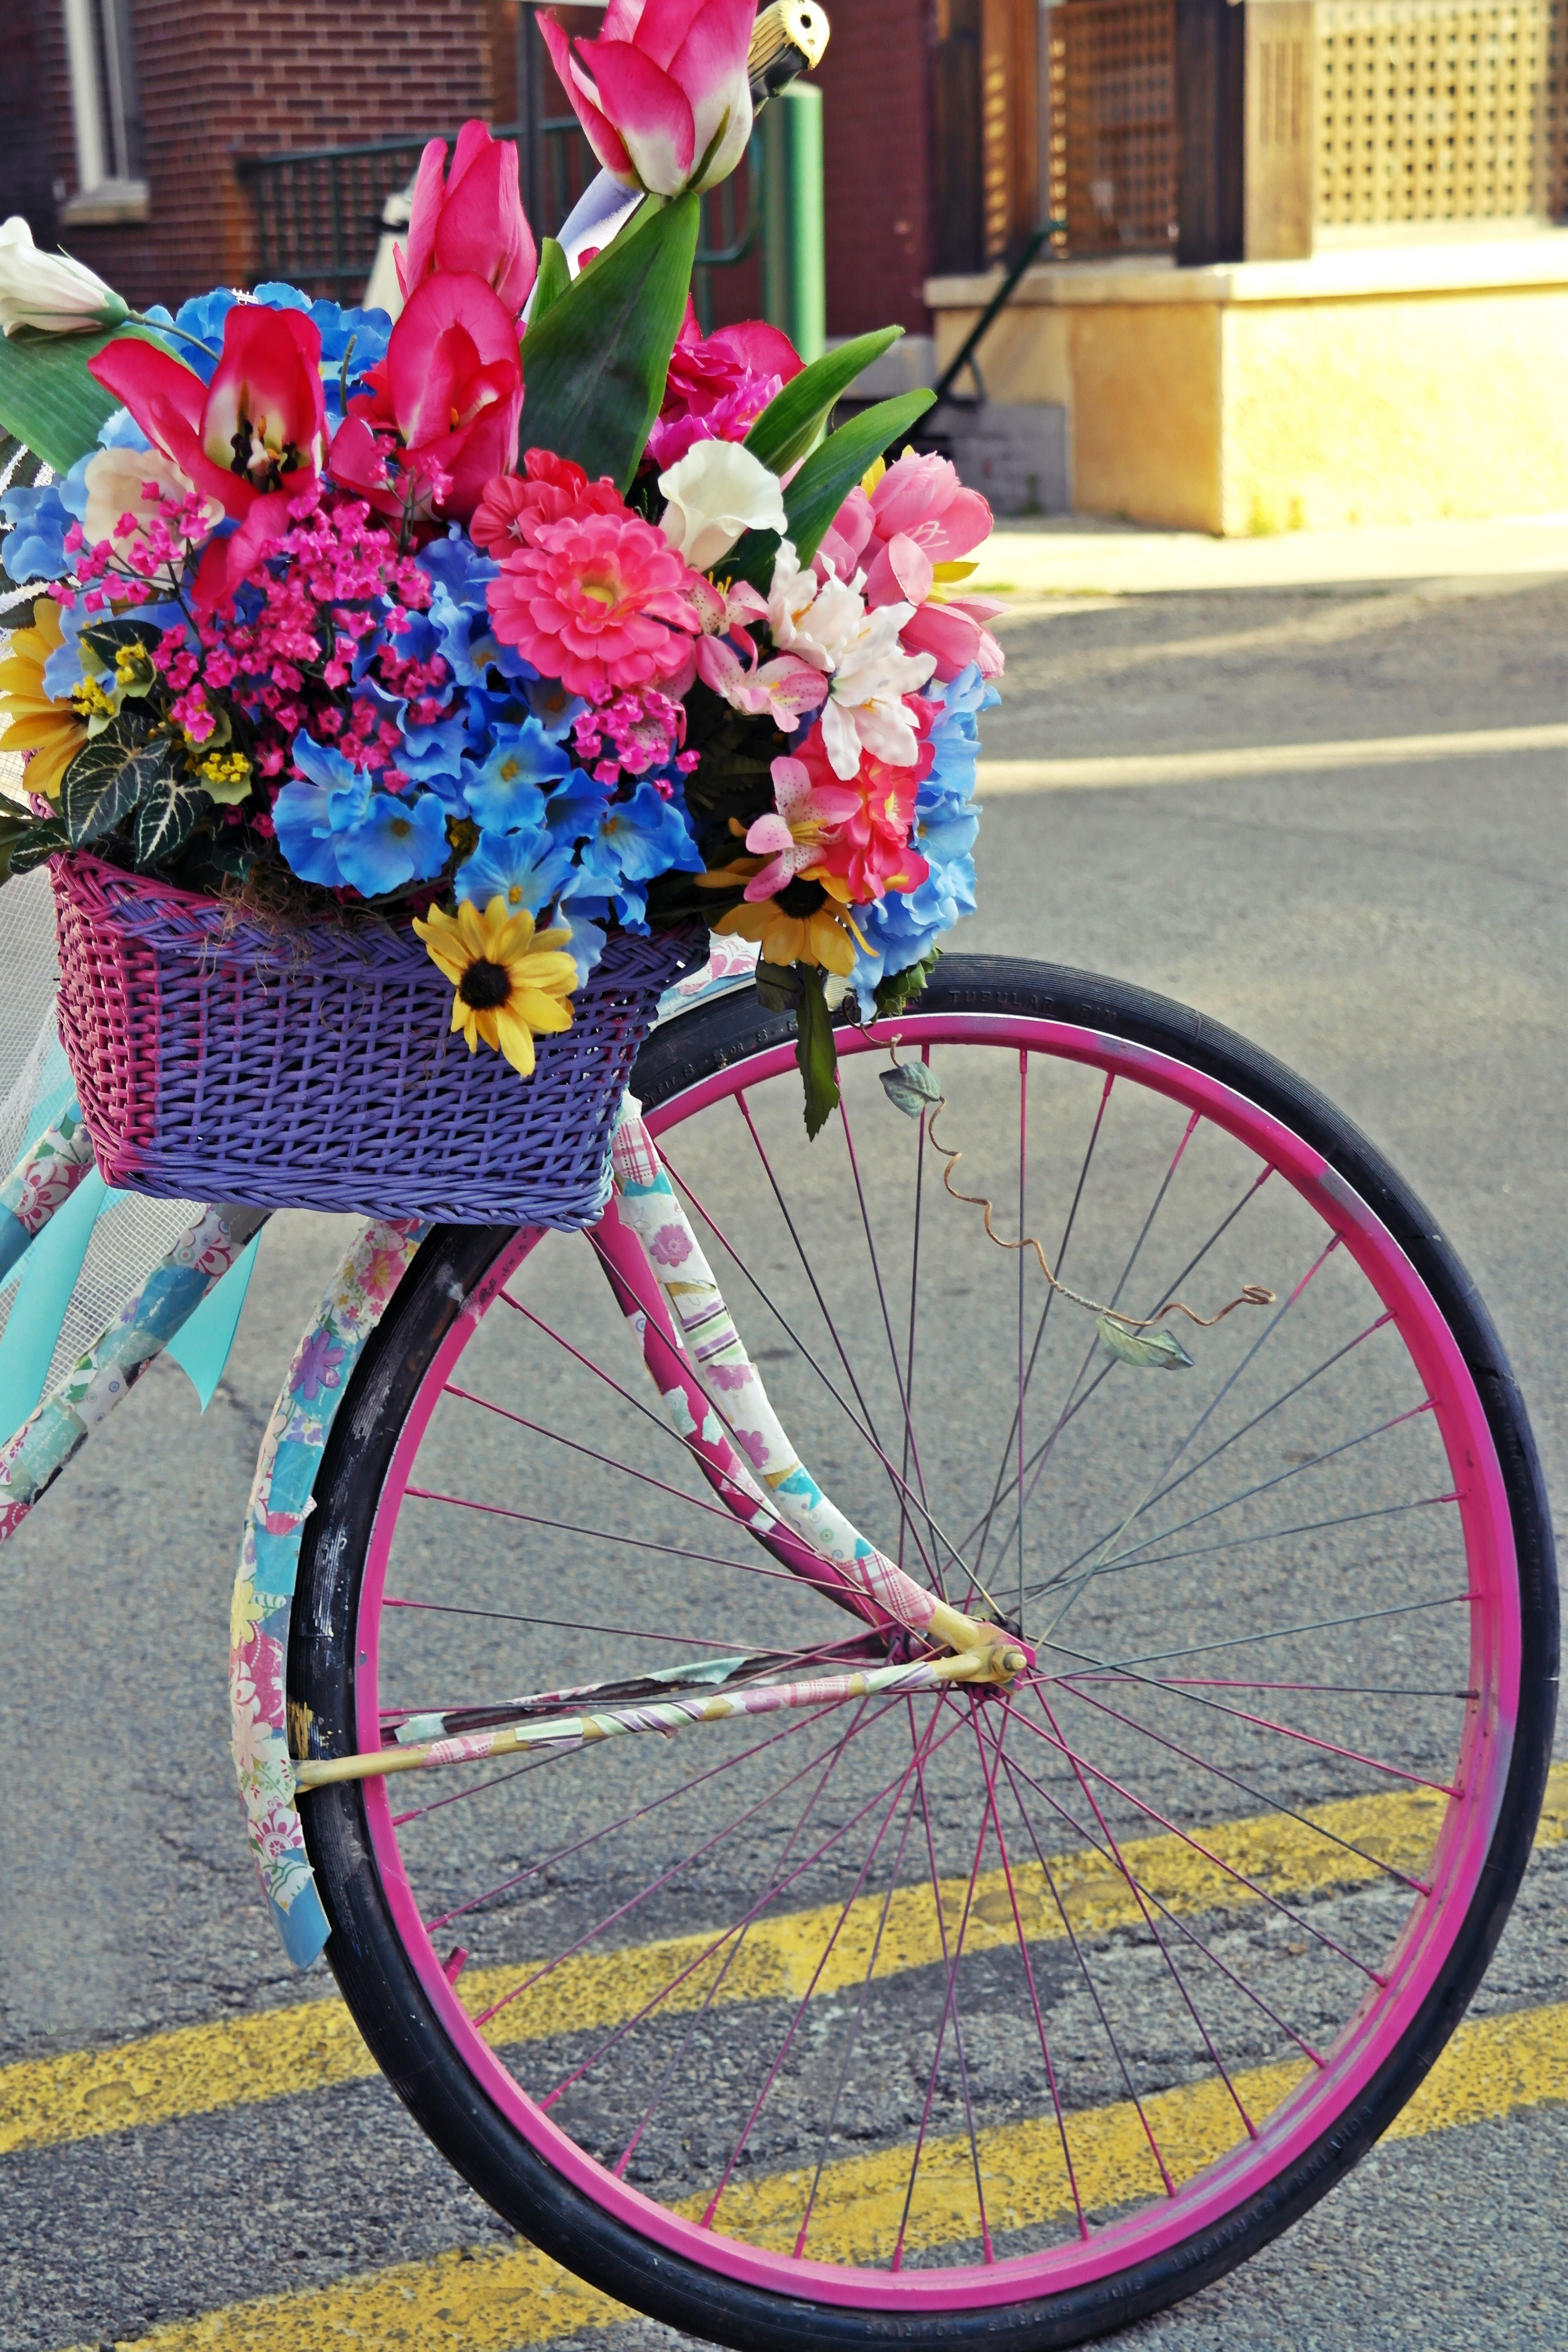 Bicycle and a Basket of Flowers | ༺ Bicycles ༻ | Pinterest ...